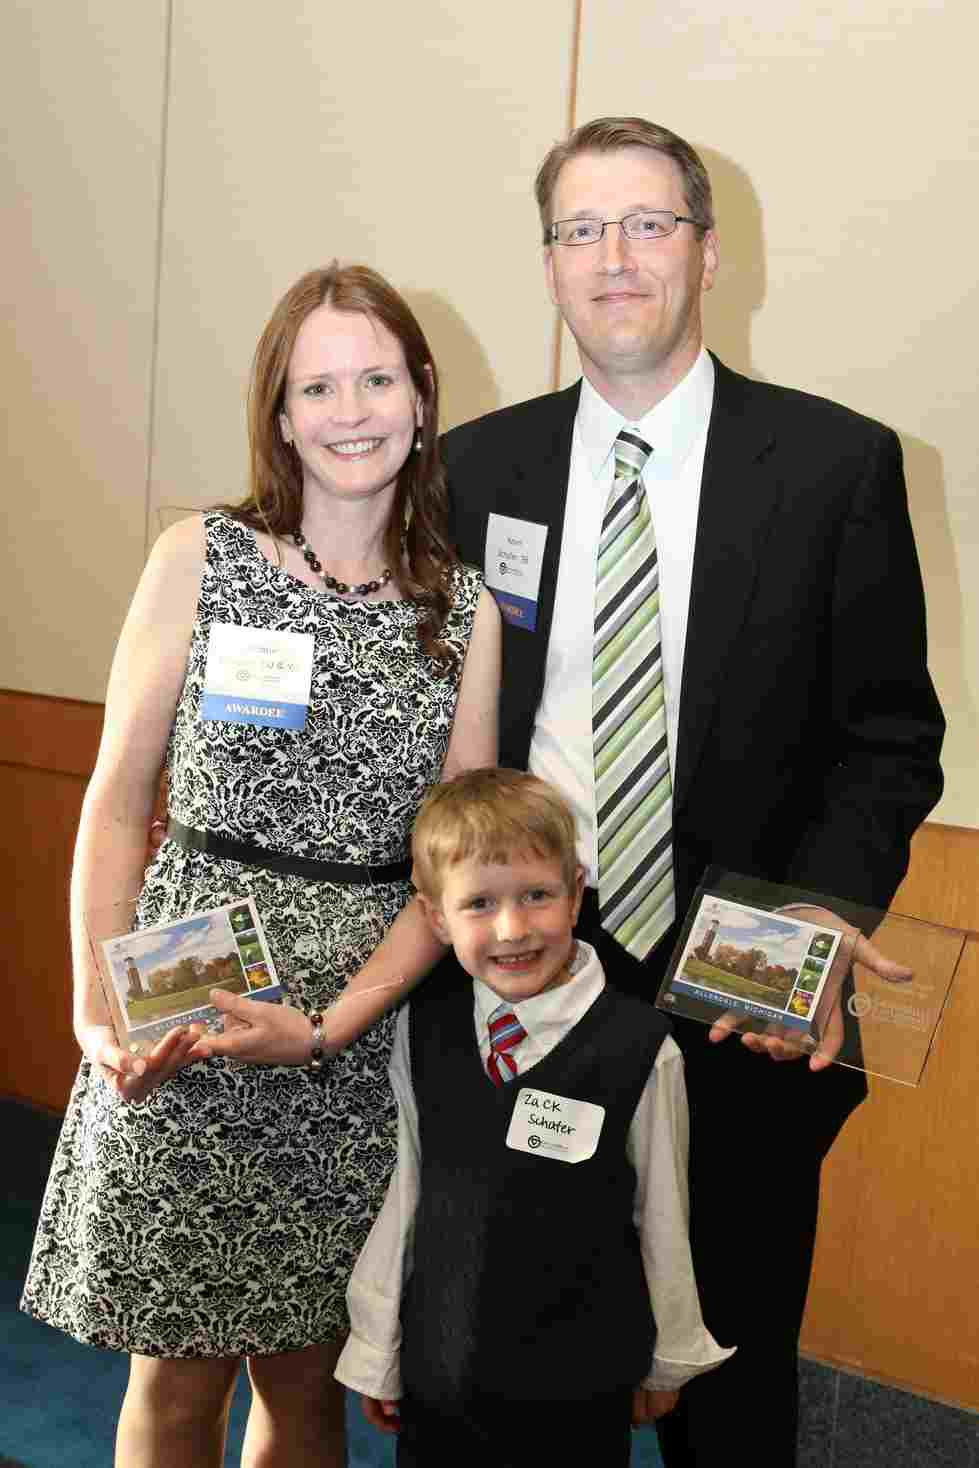 Alumni Service Award recipients Kevin, 98, and Jacqueline, 00 & 05, Schafer are pictured with their son, Zack.